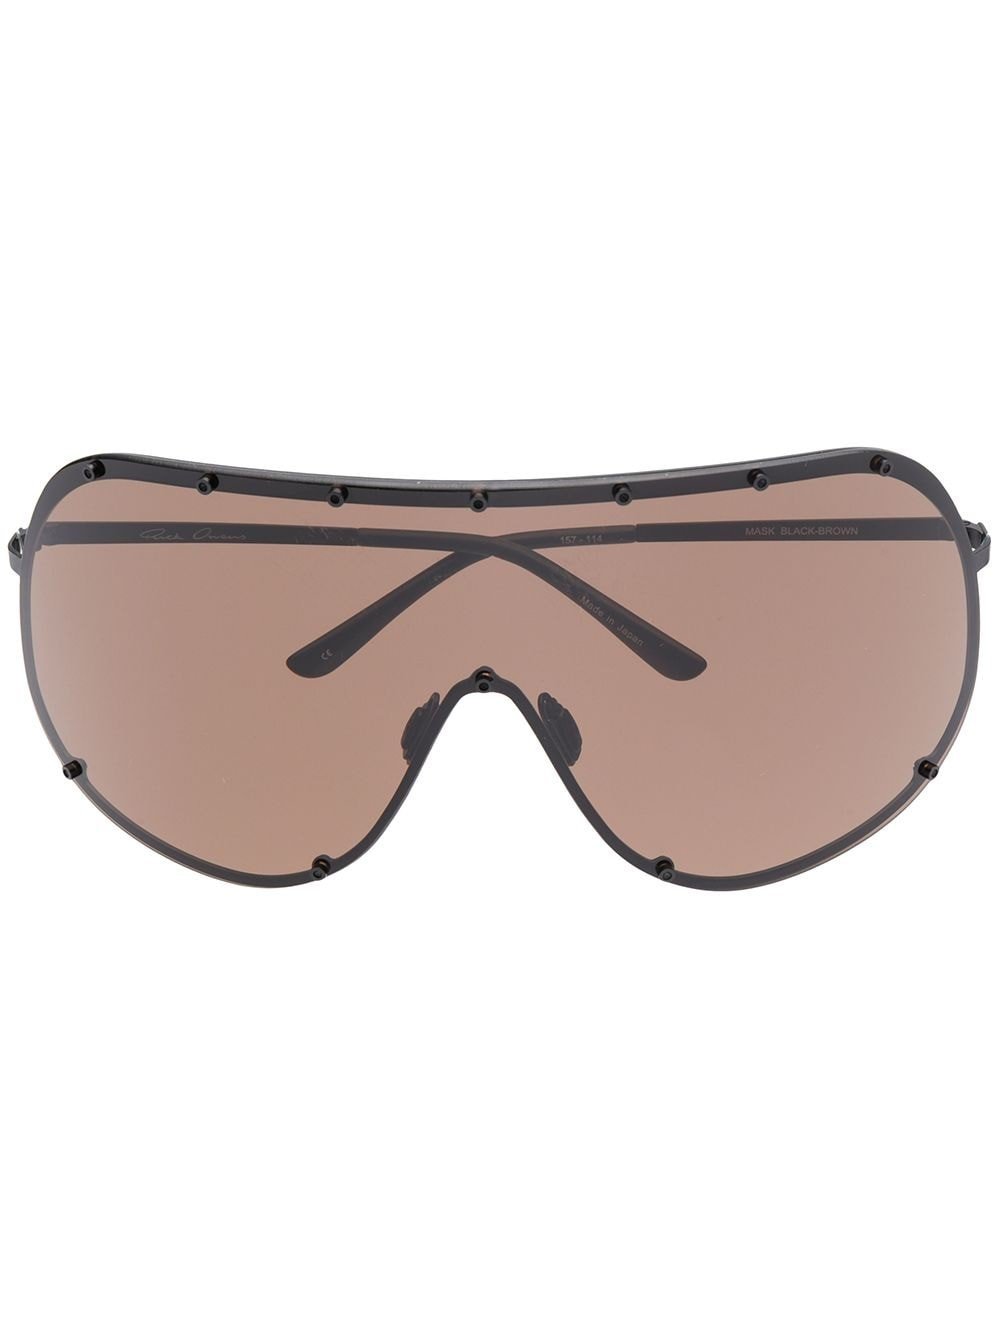 RICK OWENS MASK Stainless Steel Sunglasses - André Opticas